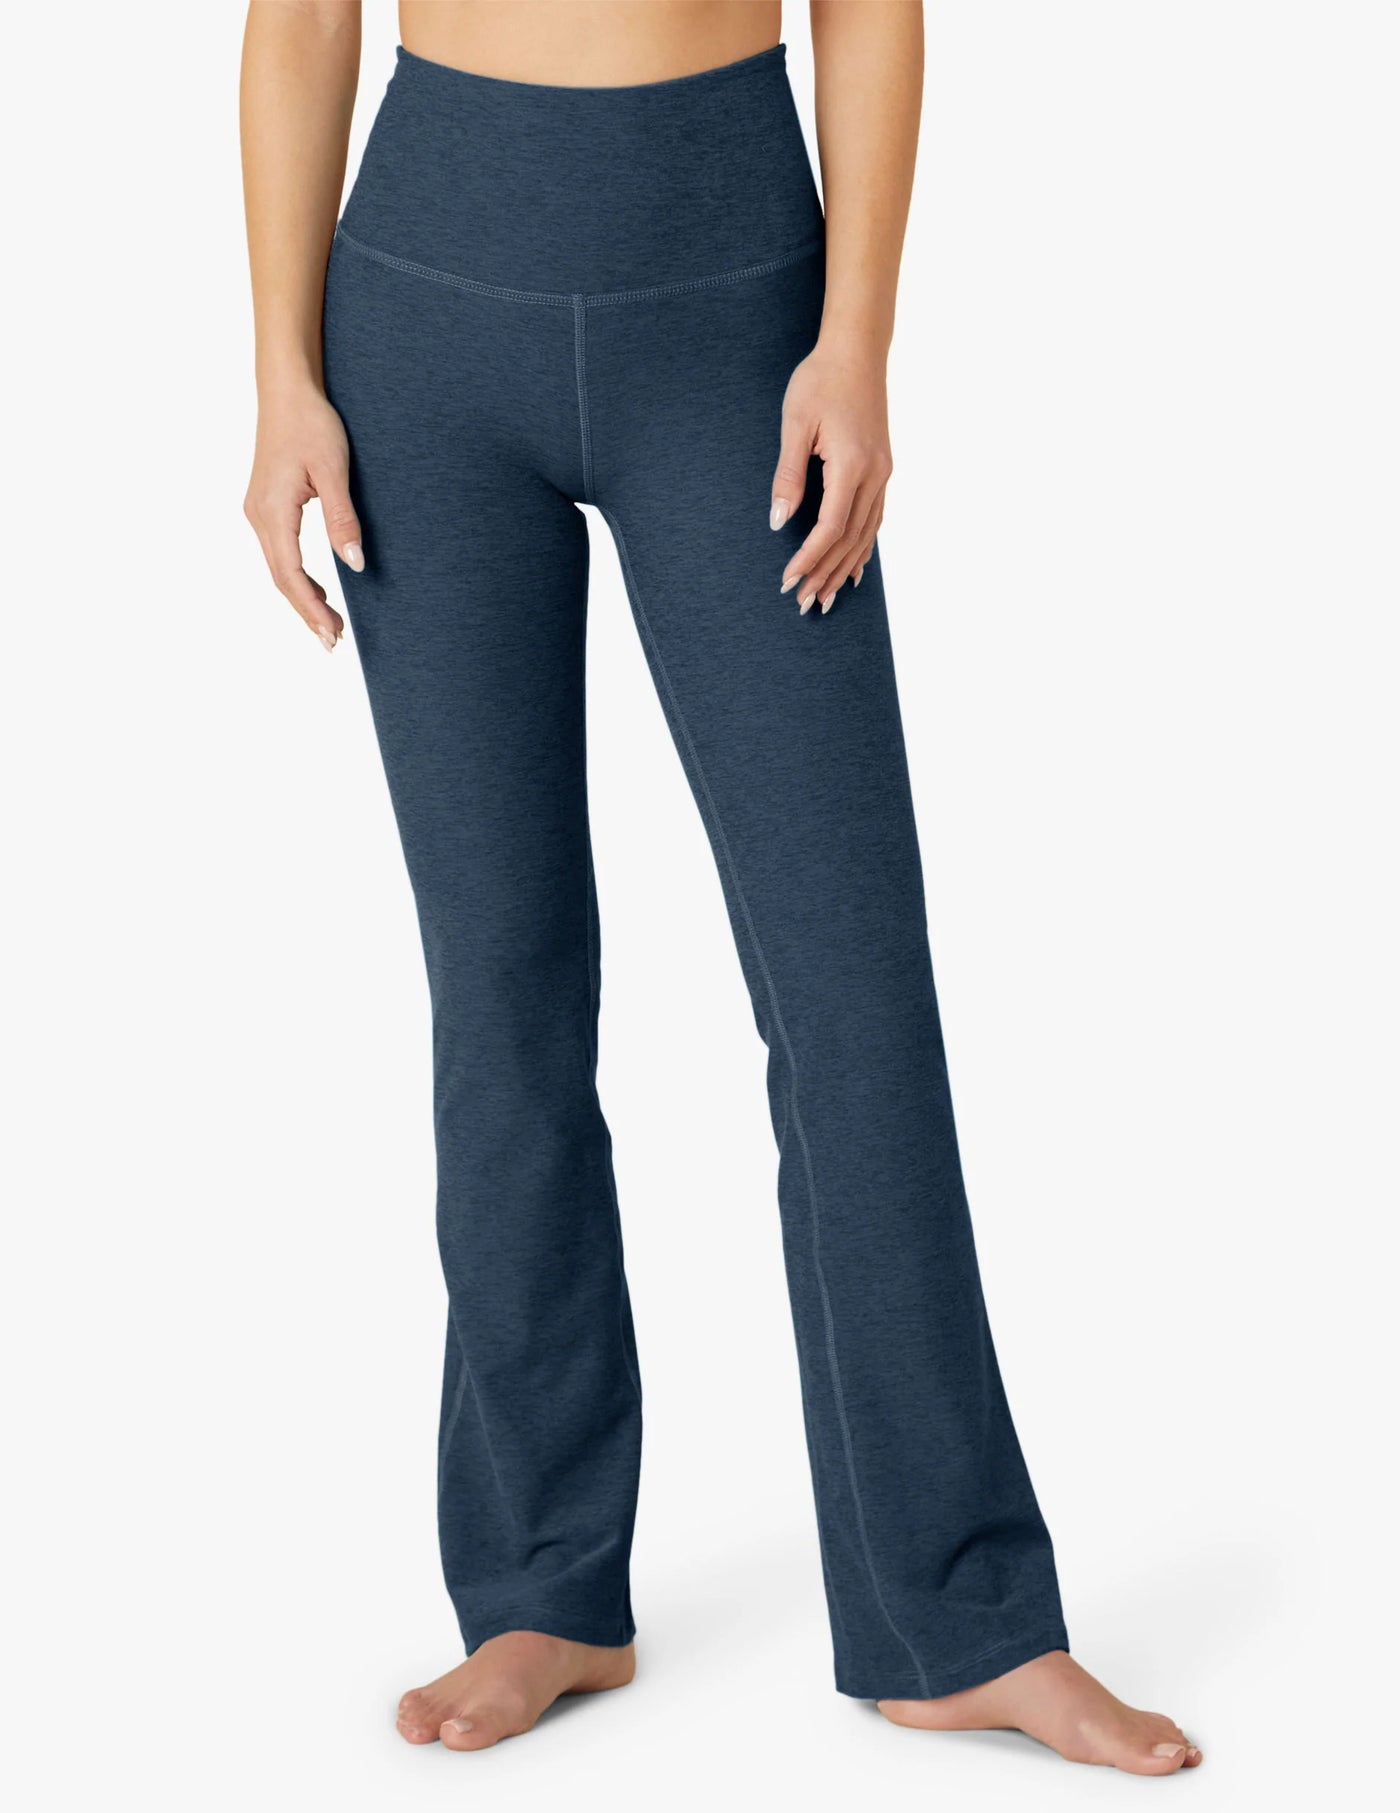 Beyond Yoga High Waisted Practice Pant in Navy